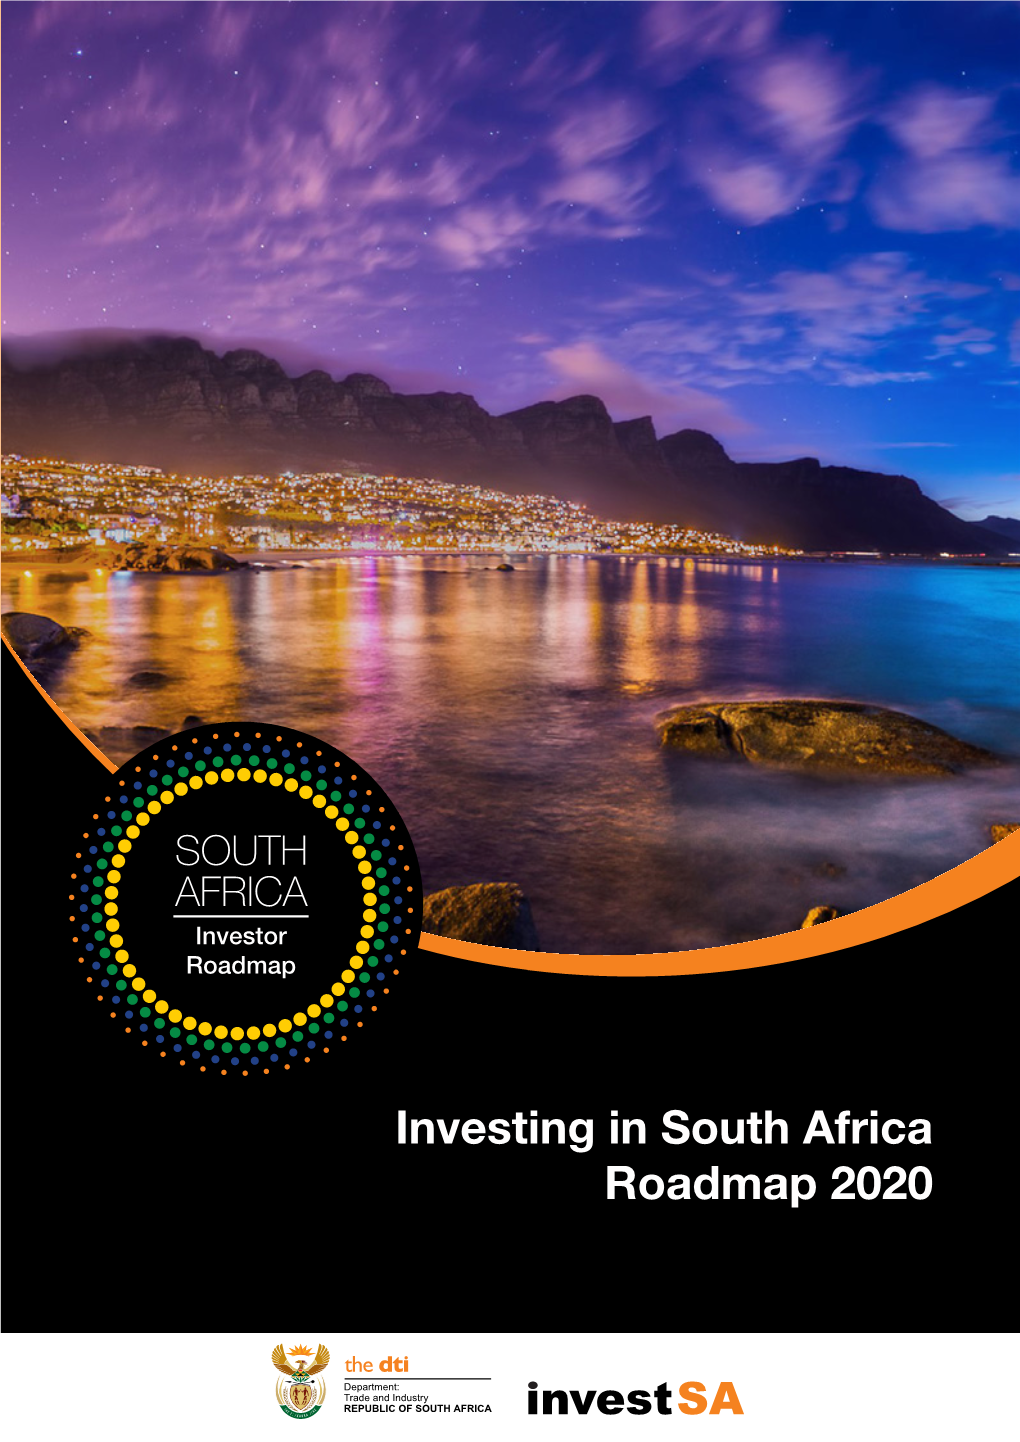 Investing in South Africa Roadmap 2020 1 SOUTH AFRICA INVESTOR ROADMAP Foreword 1 Contents